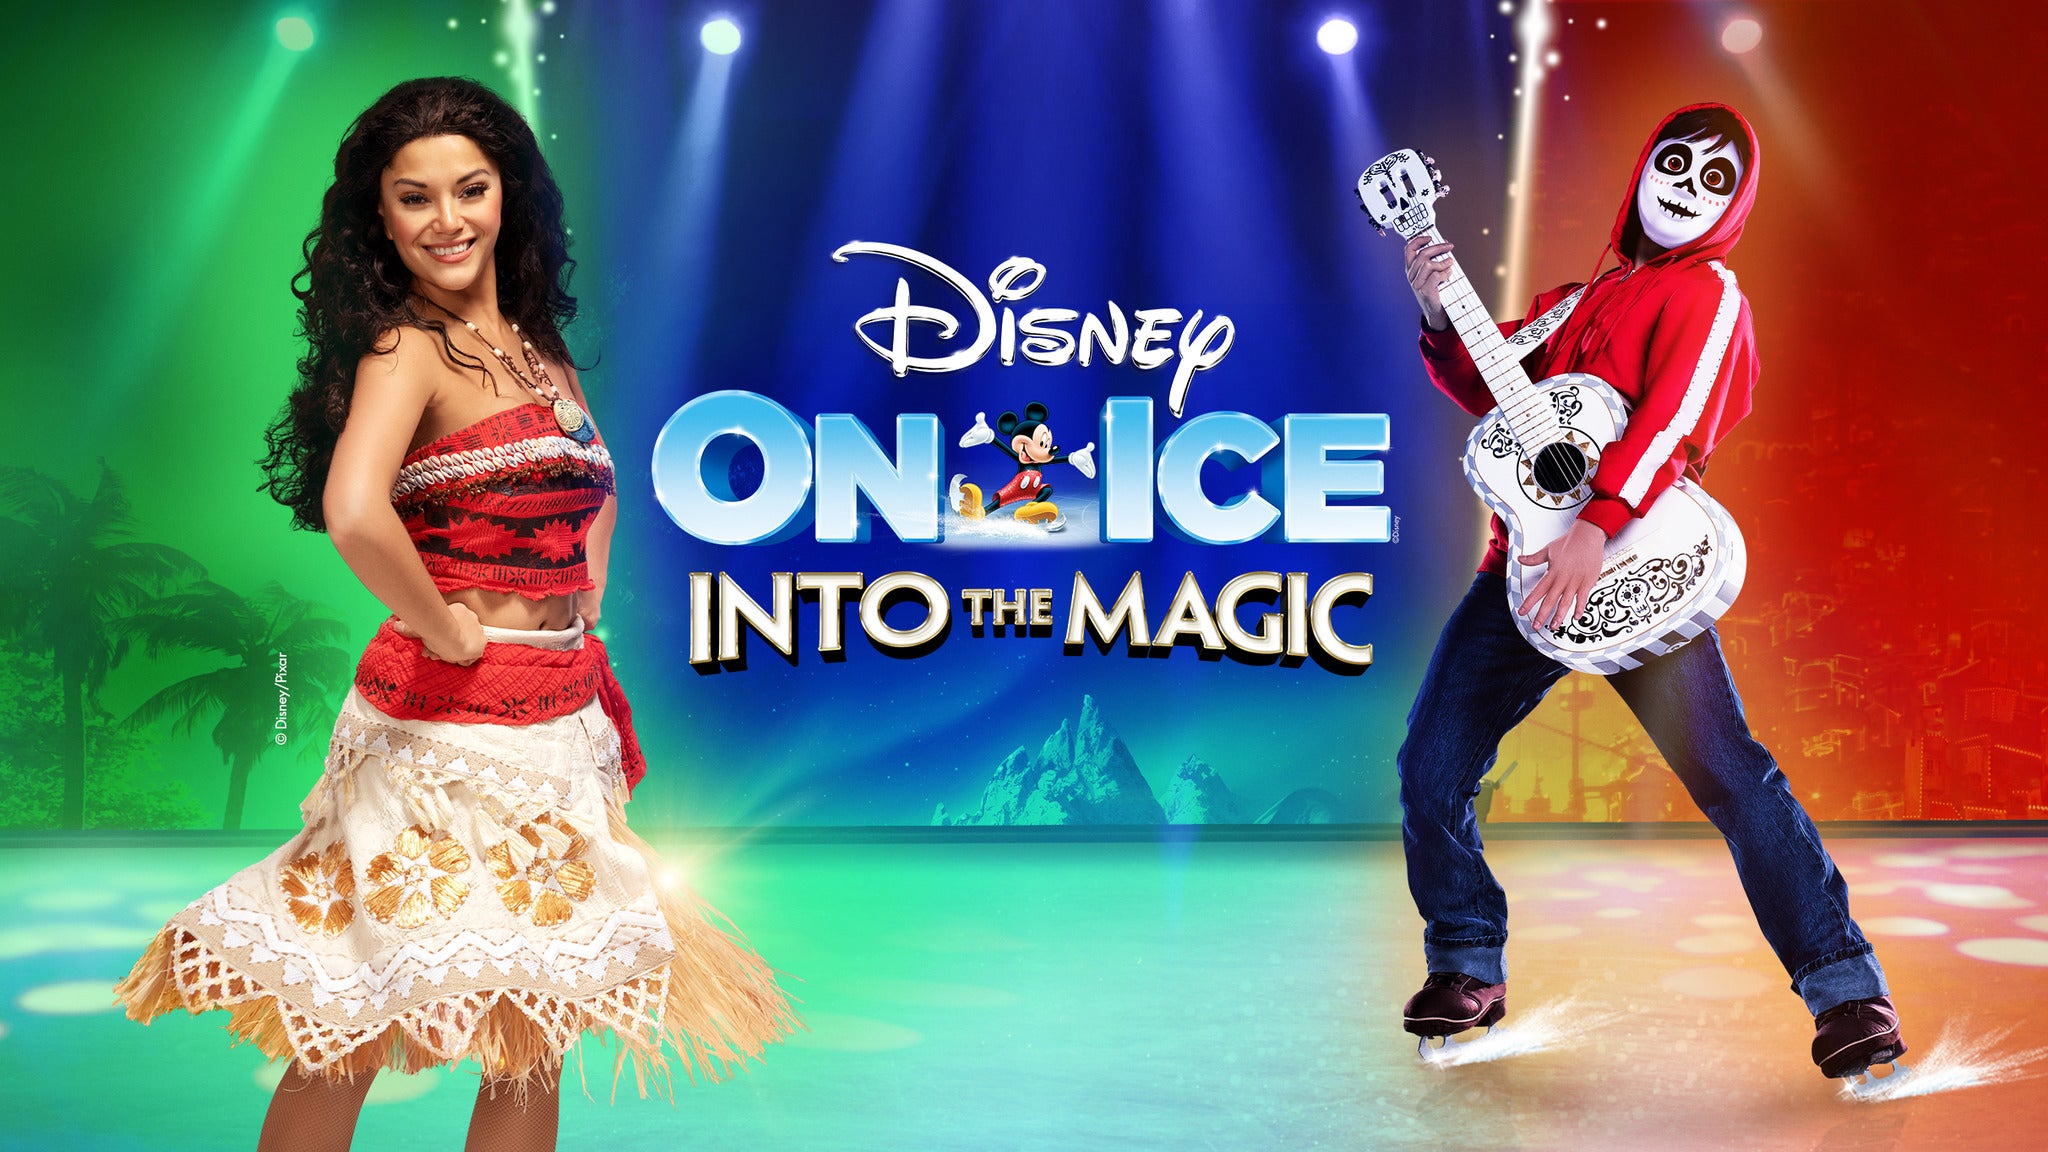 Disney On Ice presents Into the Magic Tickets Event